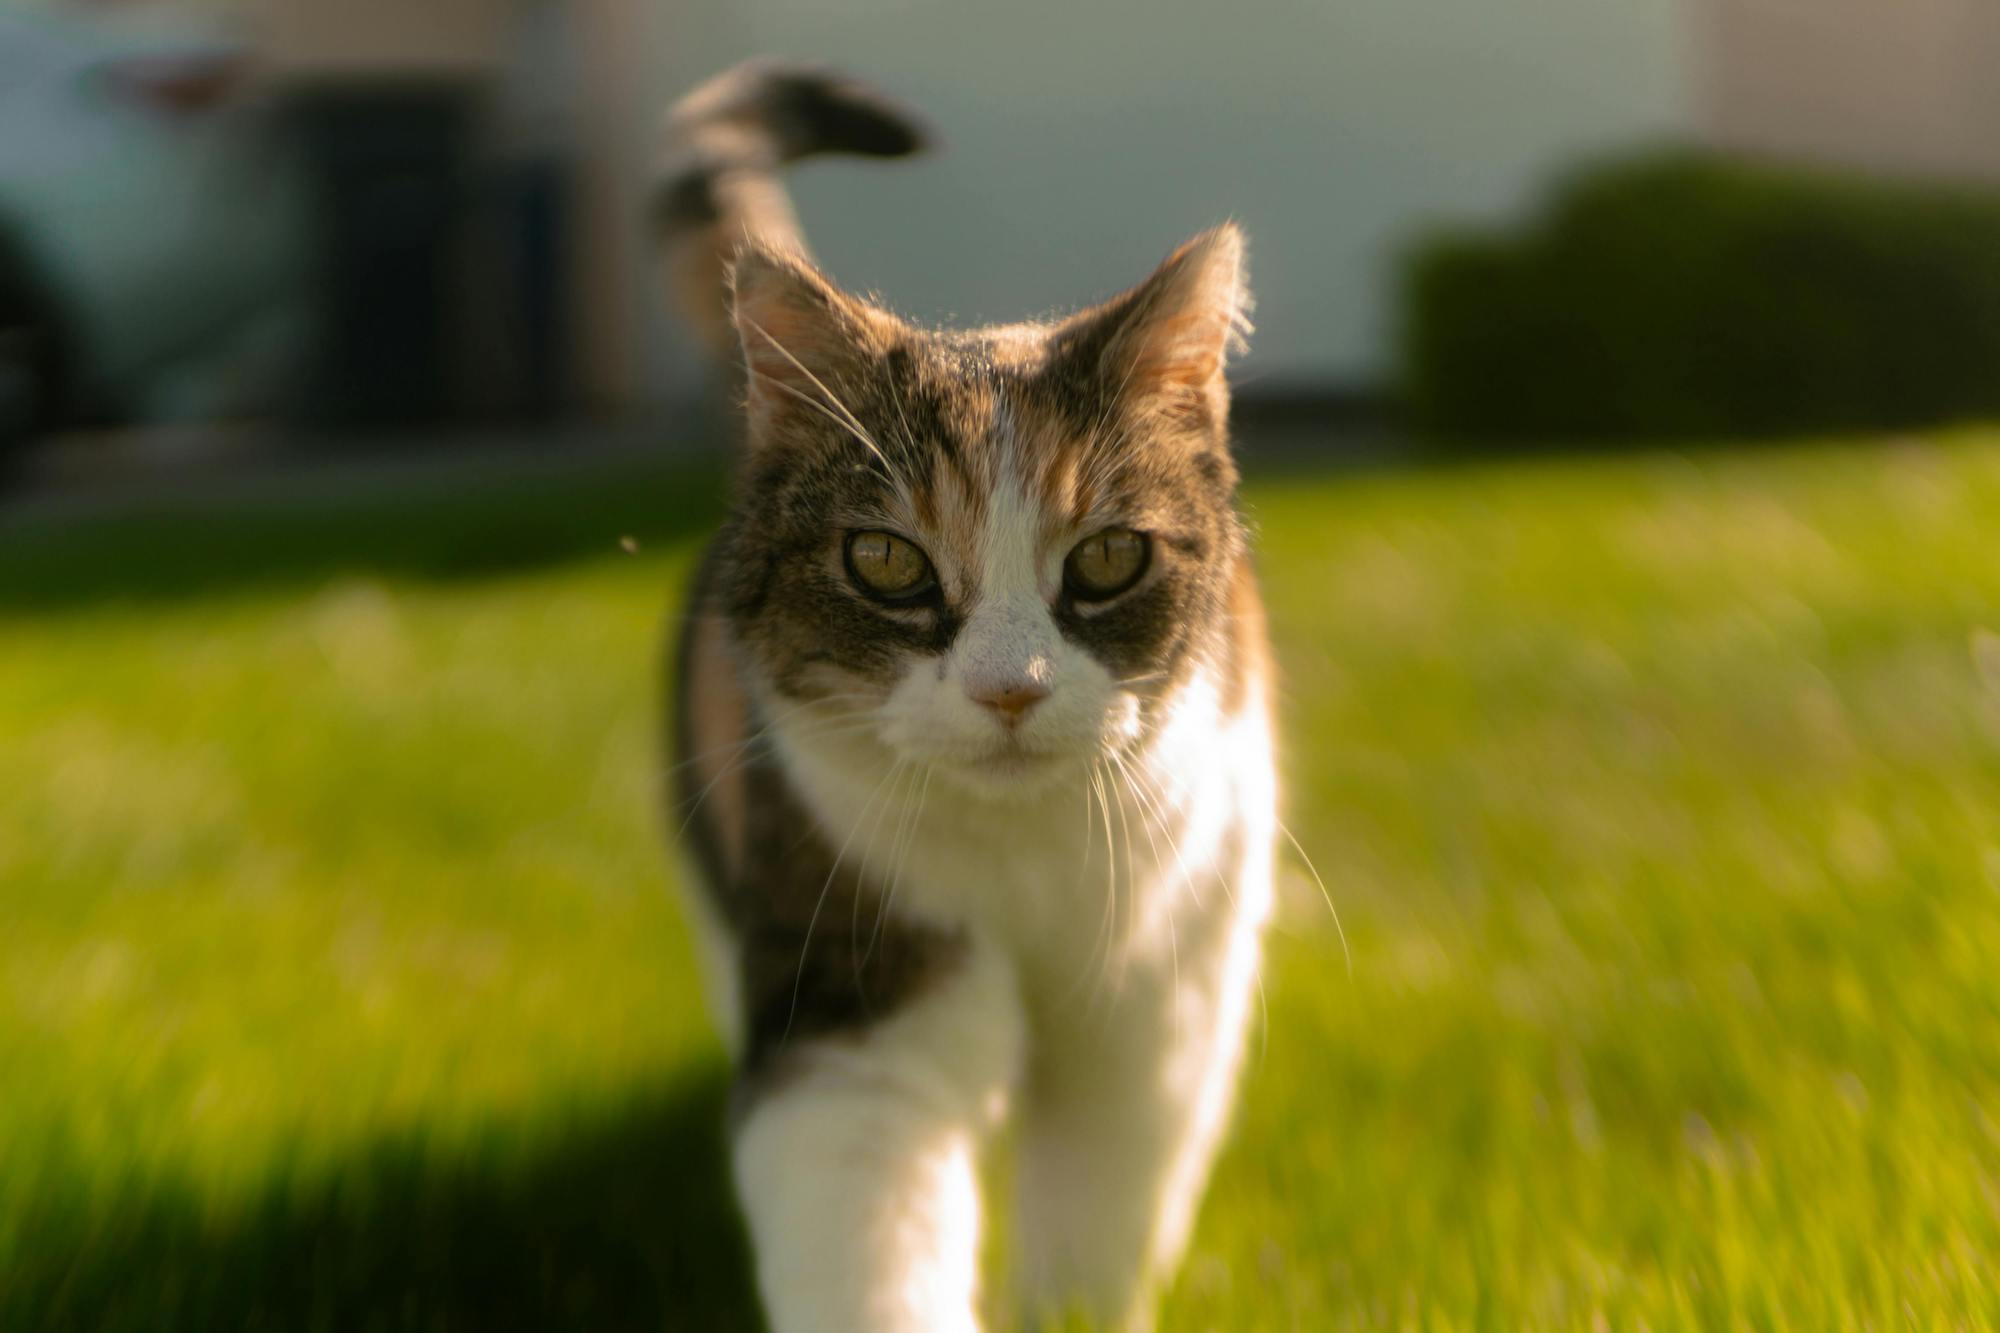 An old white and tabby cat walks across the lawn toward the camera